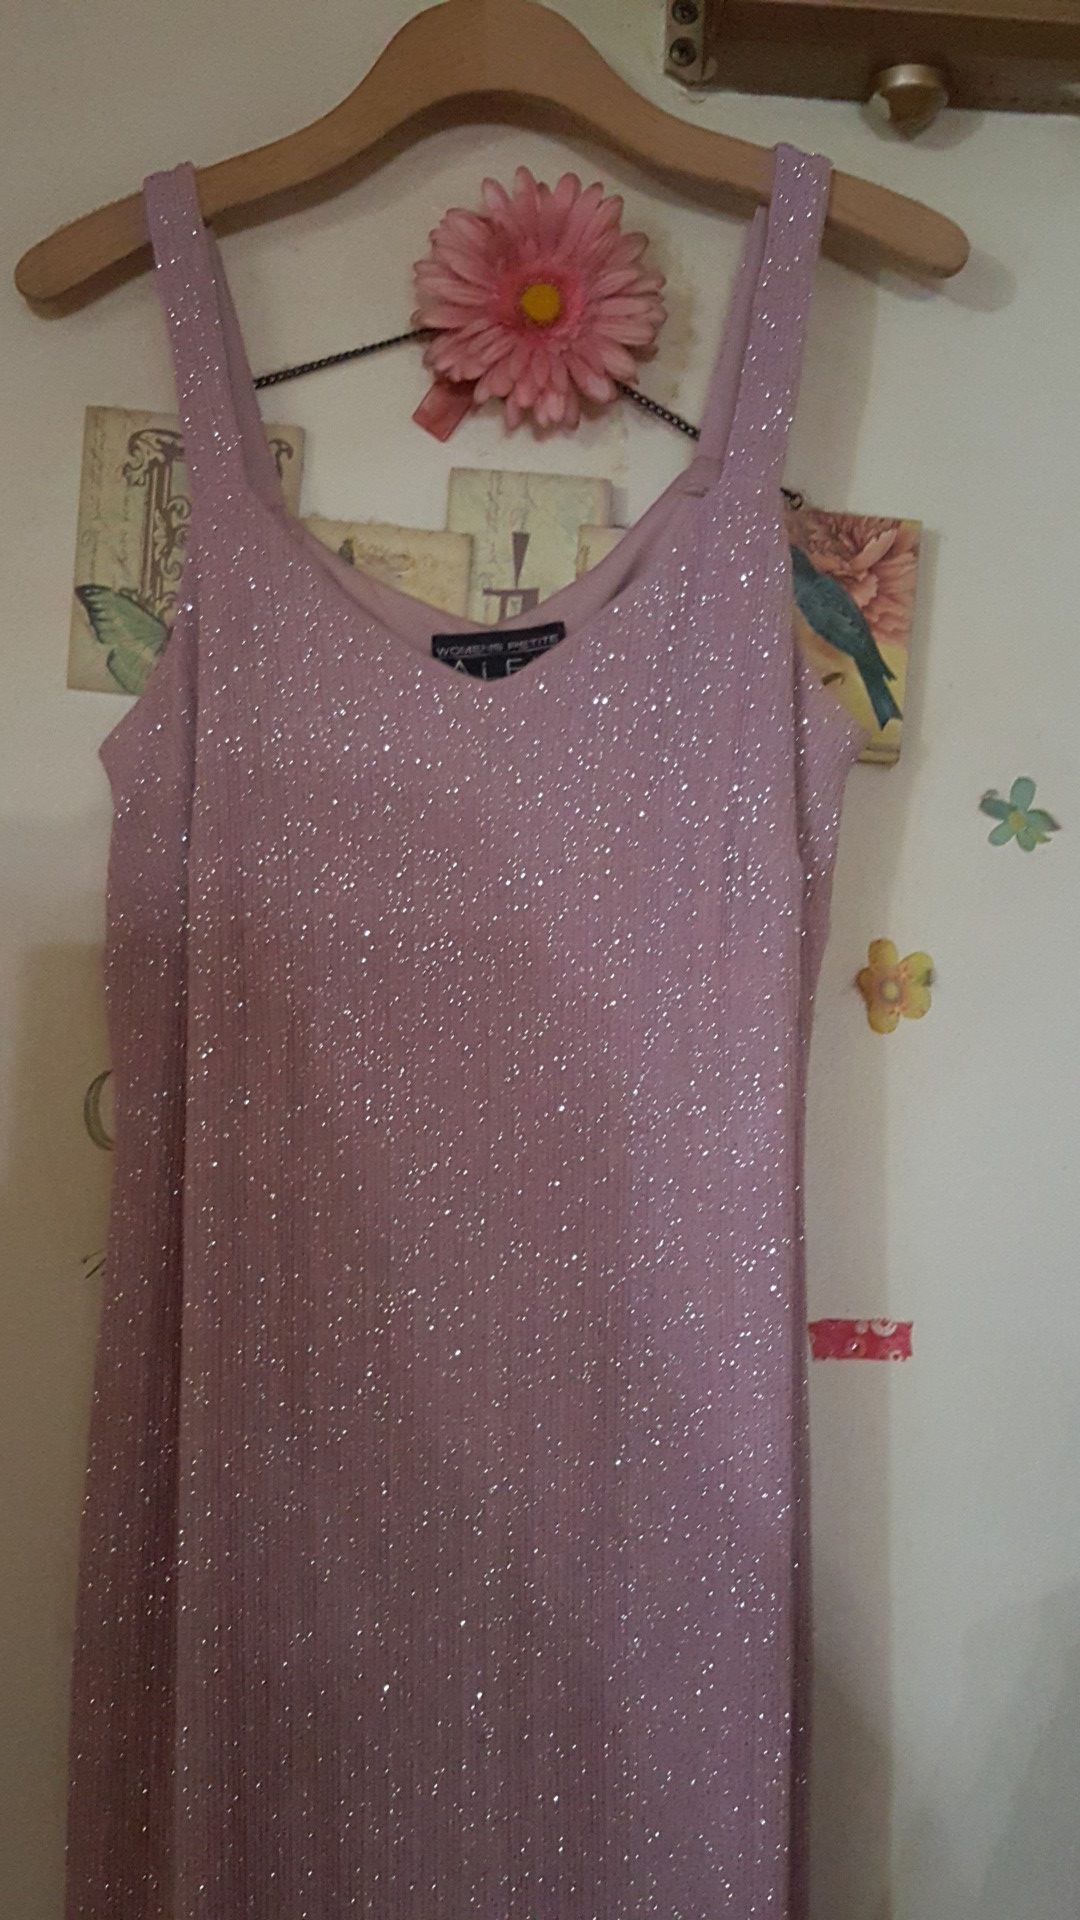 STUNNING ALEX EVENING GOWN COLOR IS BLUSH OR SOPHISTICATED DEEP PINK SIZE 14 THUS IS A STUNNING BLINGING SPARKLING DRESS